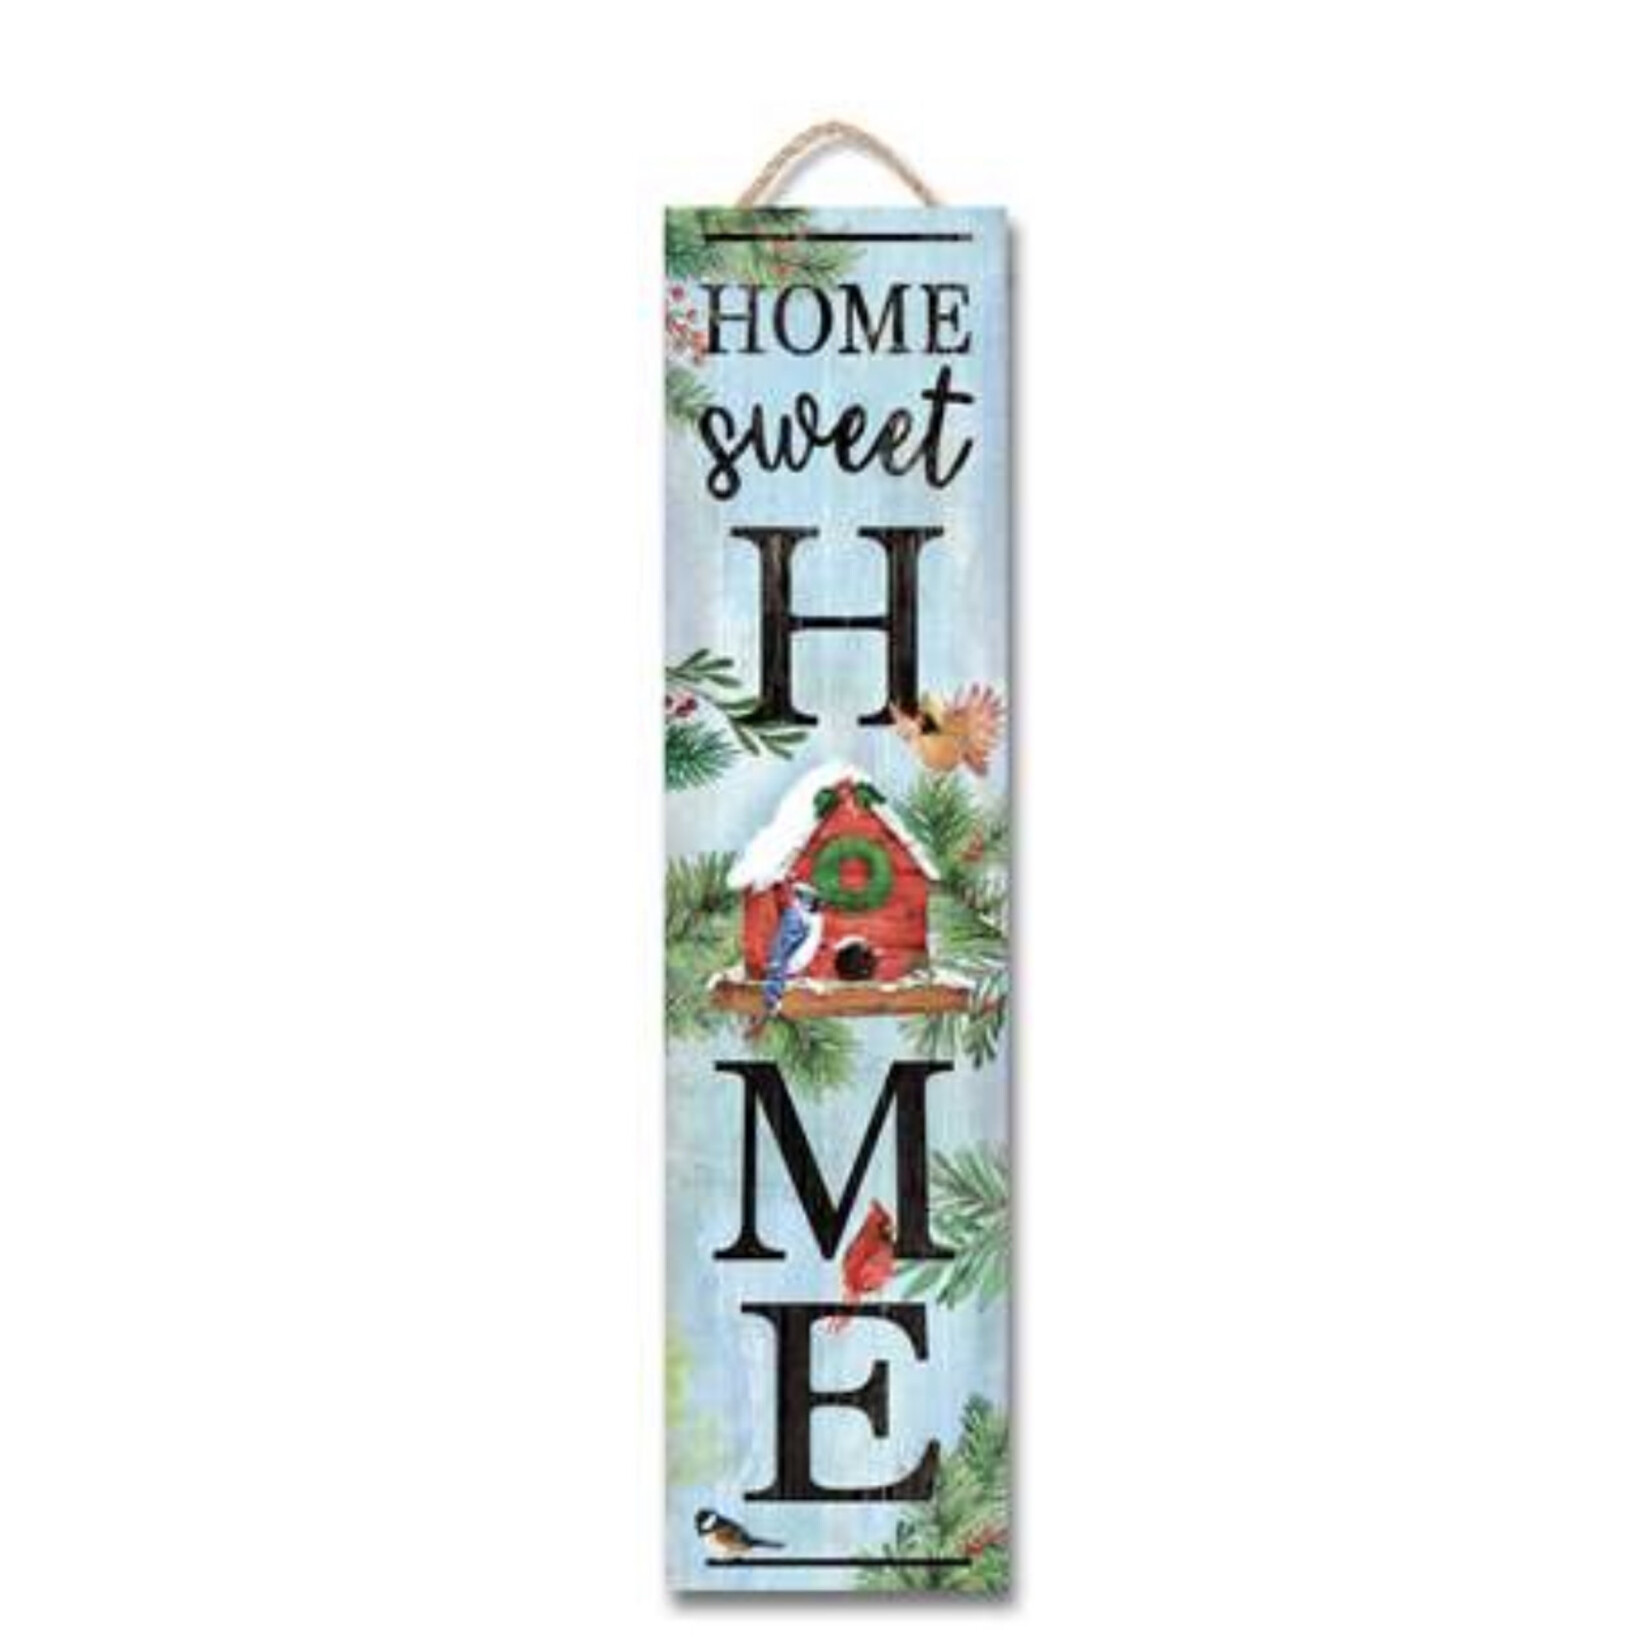 My Word! Home Sweet Home Birdhouse w/Holly Stand Out Tall Sign